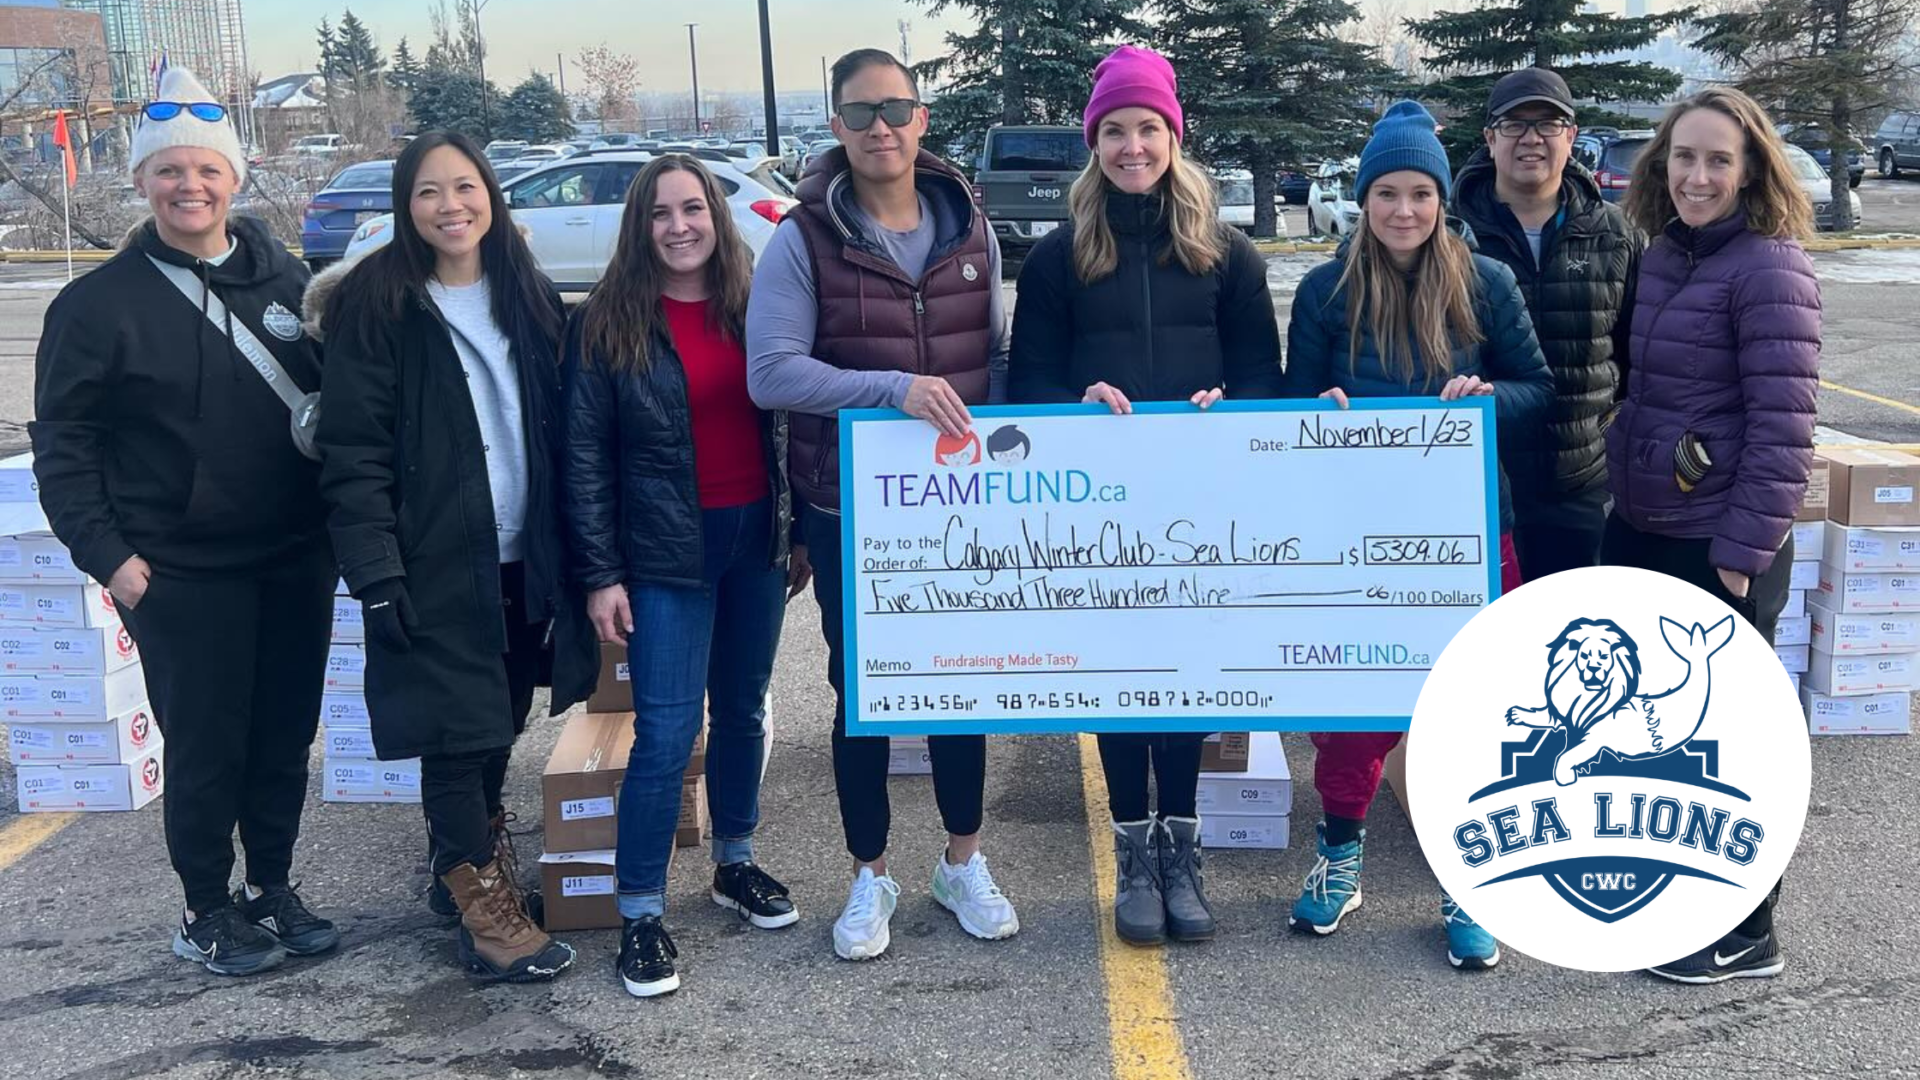 Calgary Winter Club Sea Lions Raise Over $5K with Pizza & Meat Fundraiser